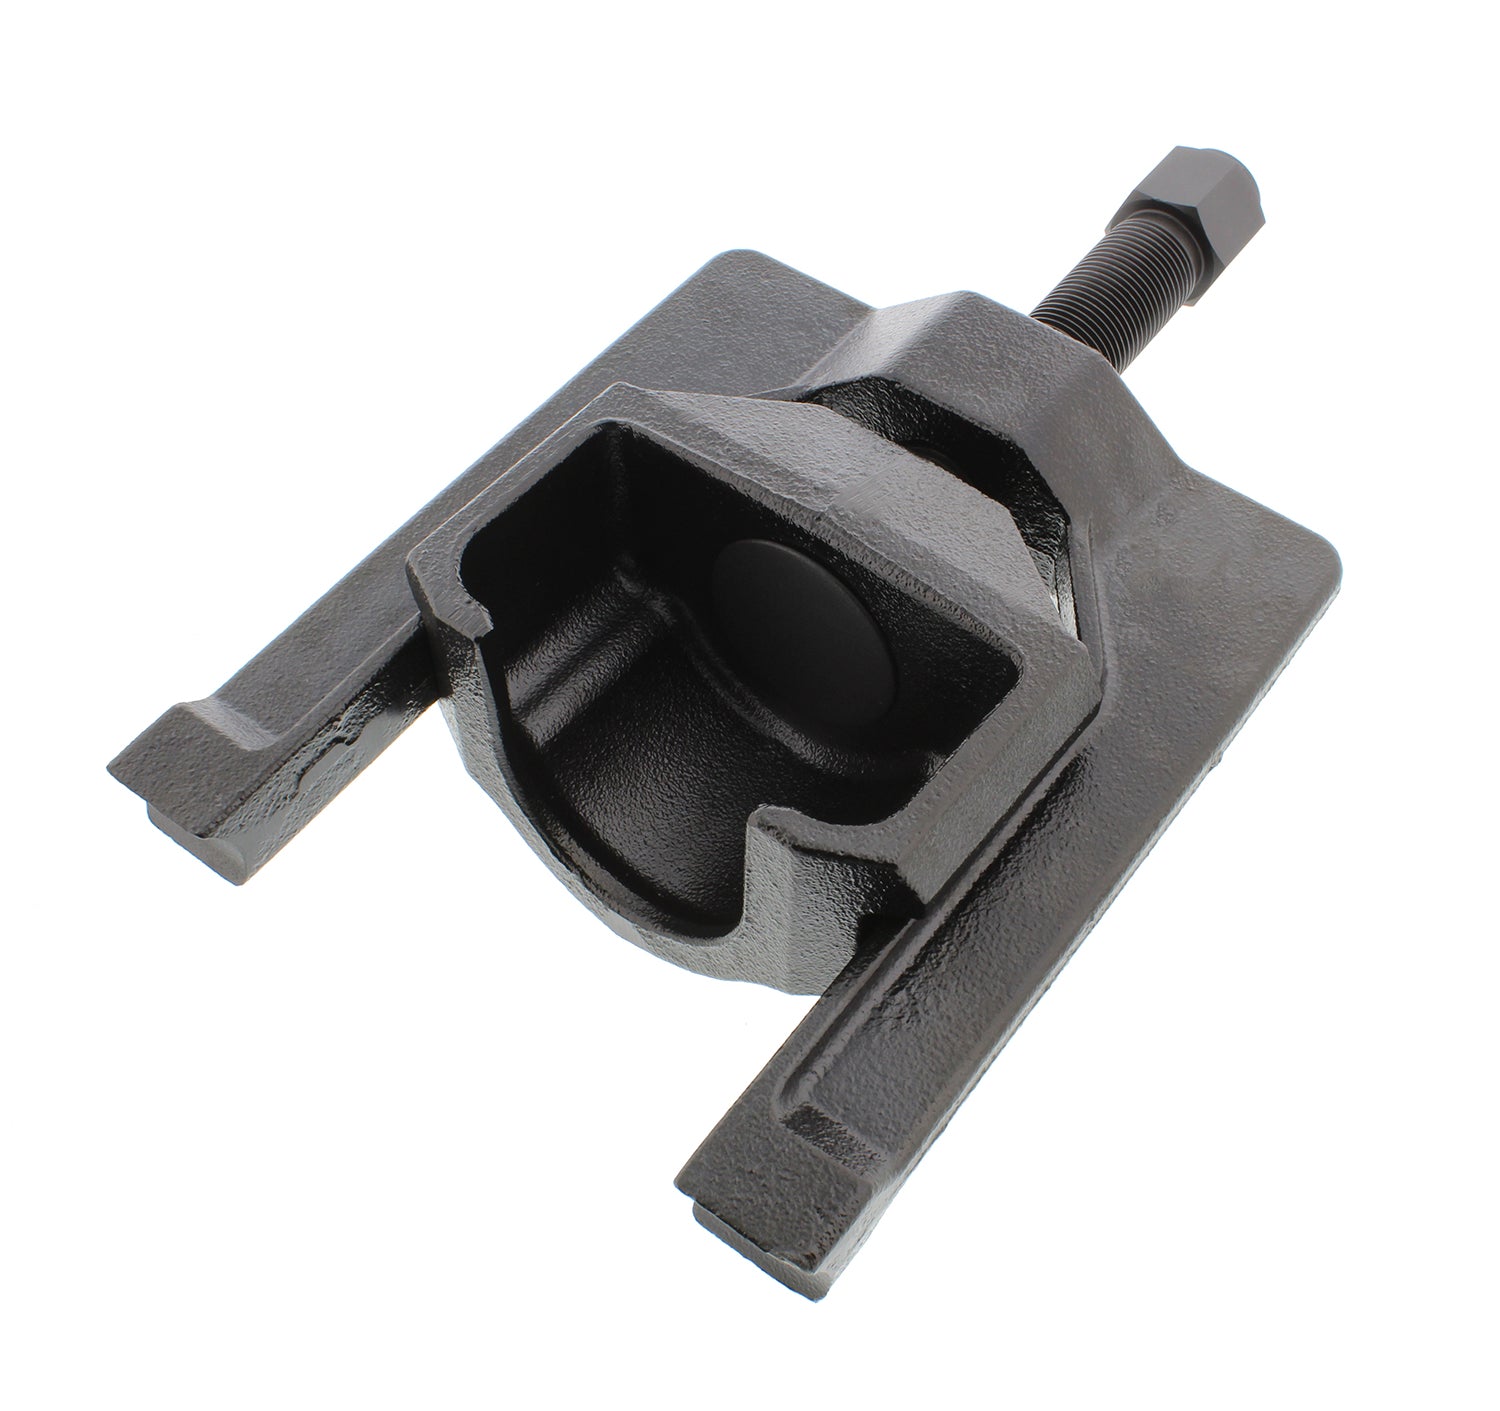 U-Joint Puller Removal Tool for Spicer Meritor Rockwell Class 7 & 8